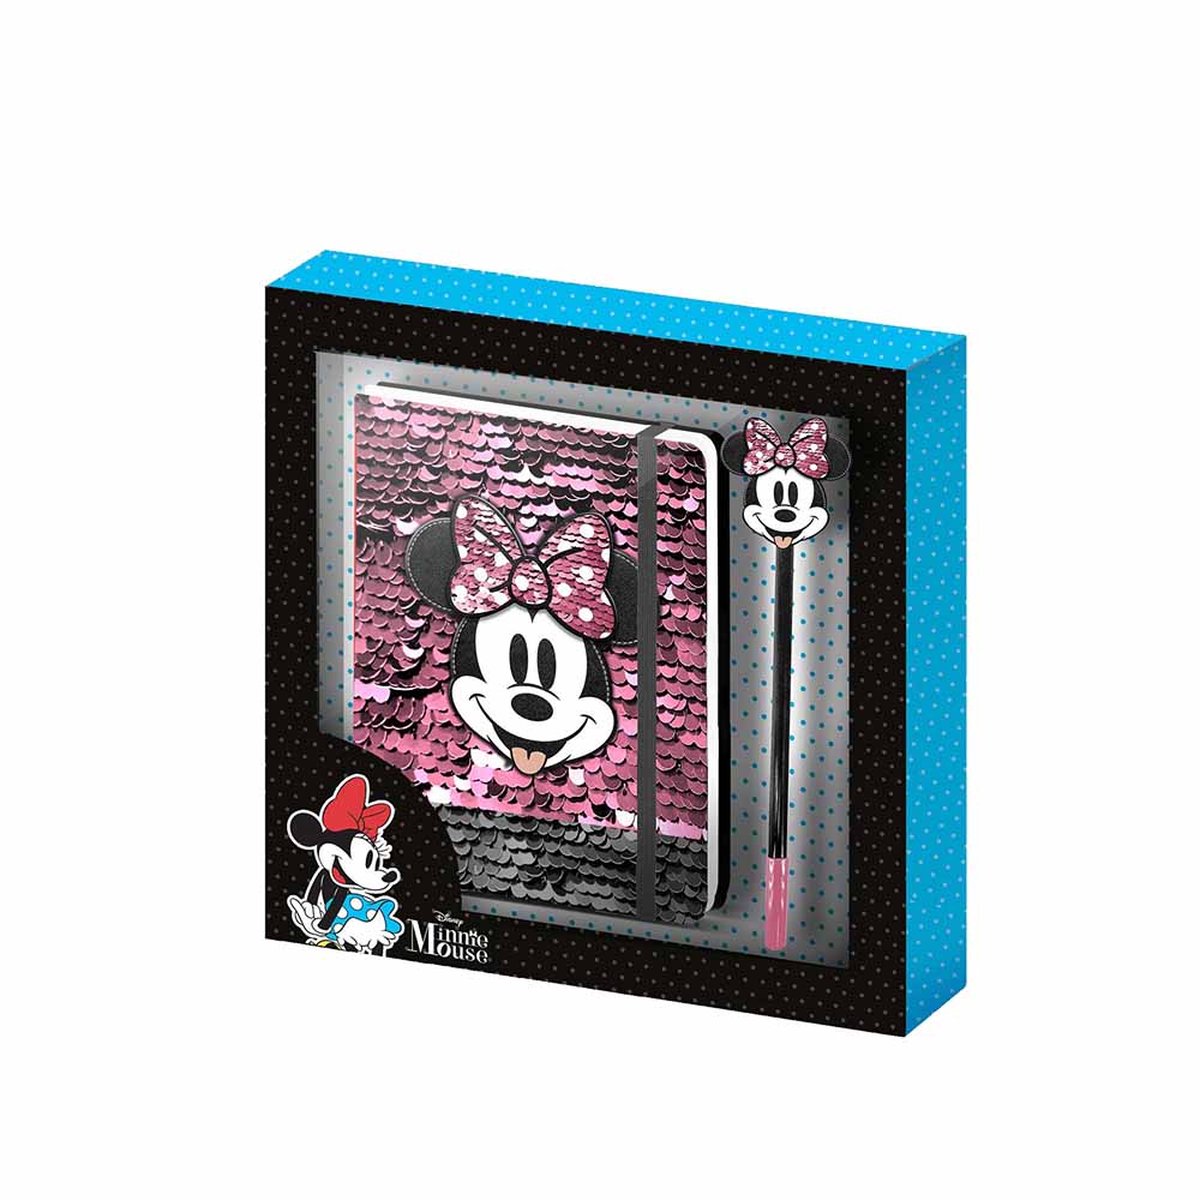 Disney Minnie Mouse - Notebook with Pen - Gift Set - Lollipop - 100 pagina's